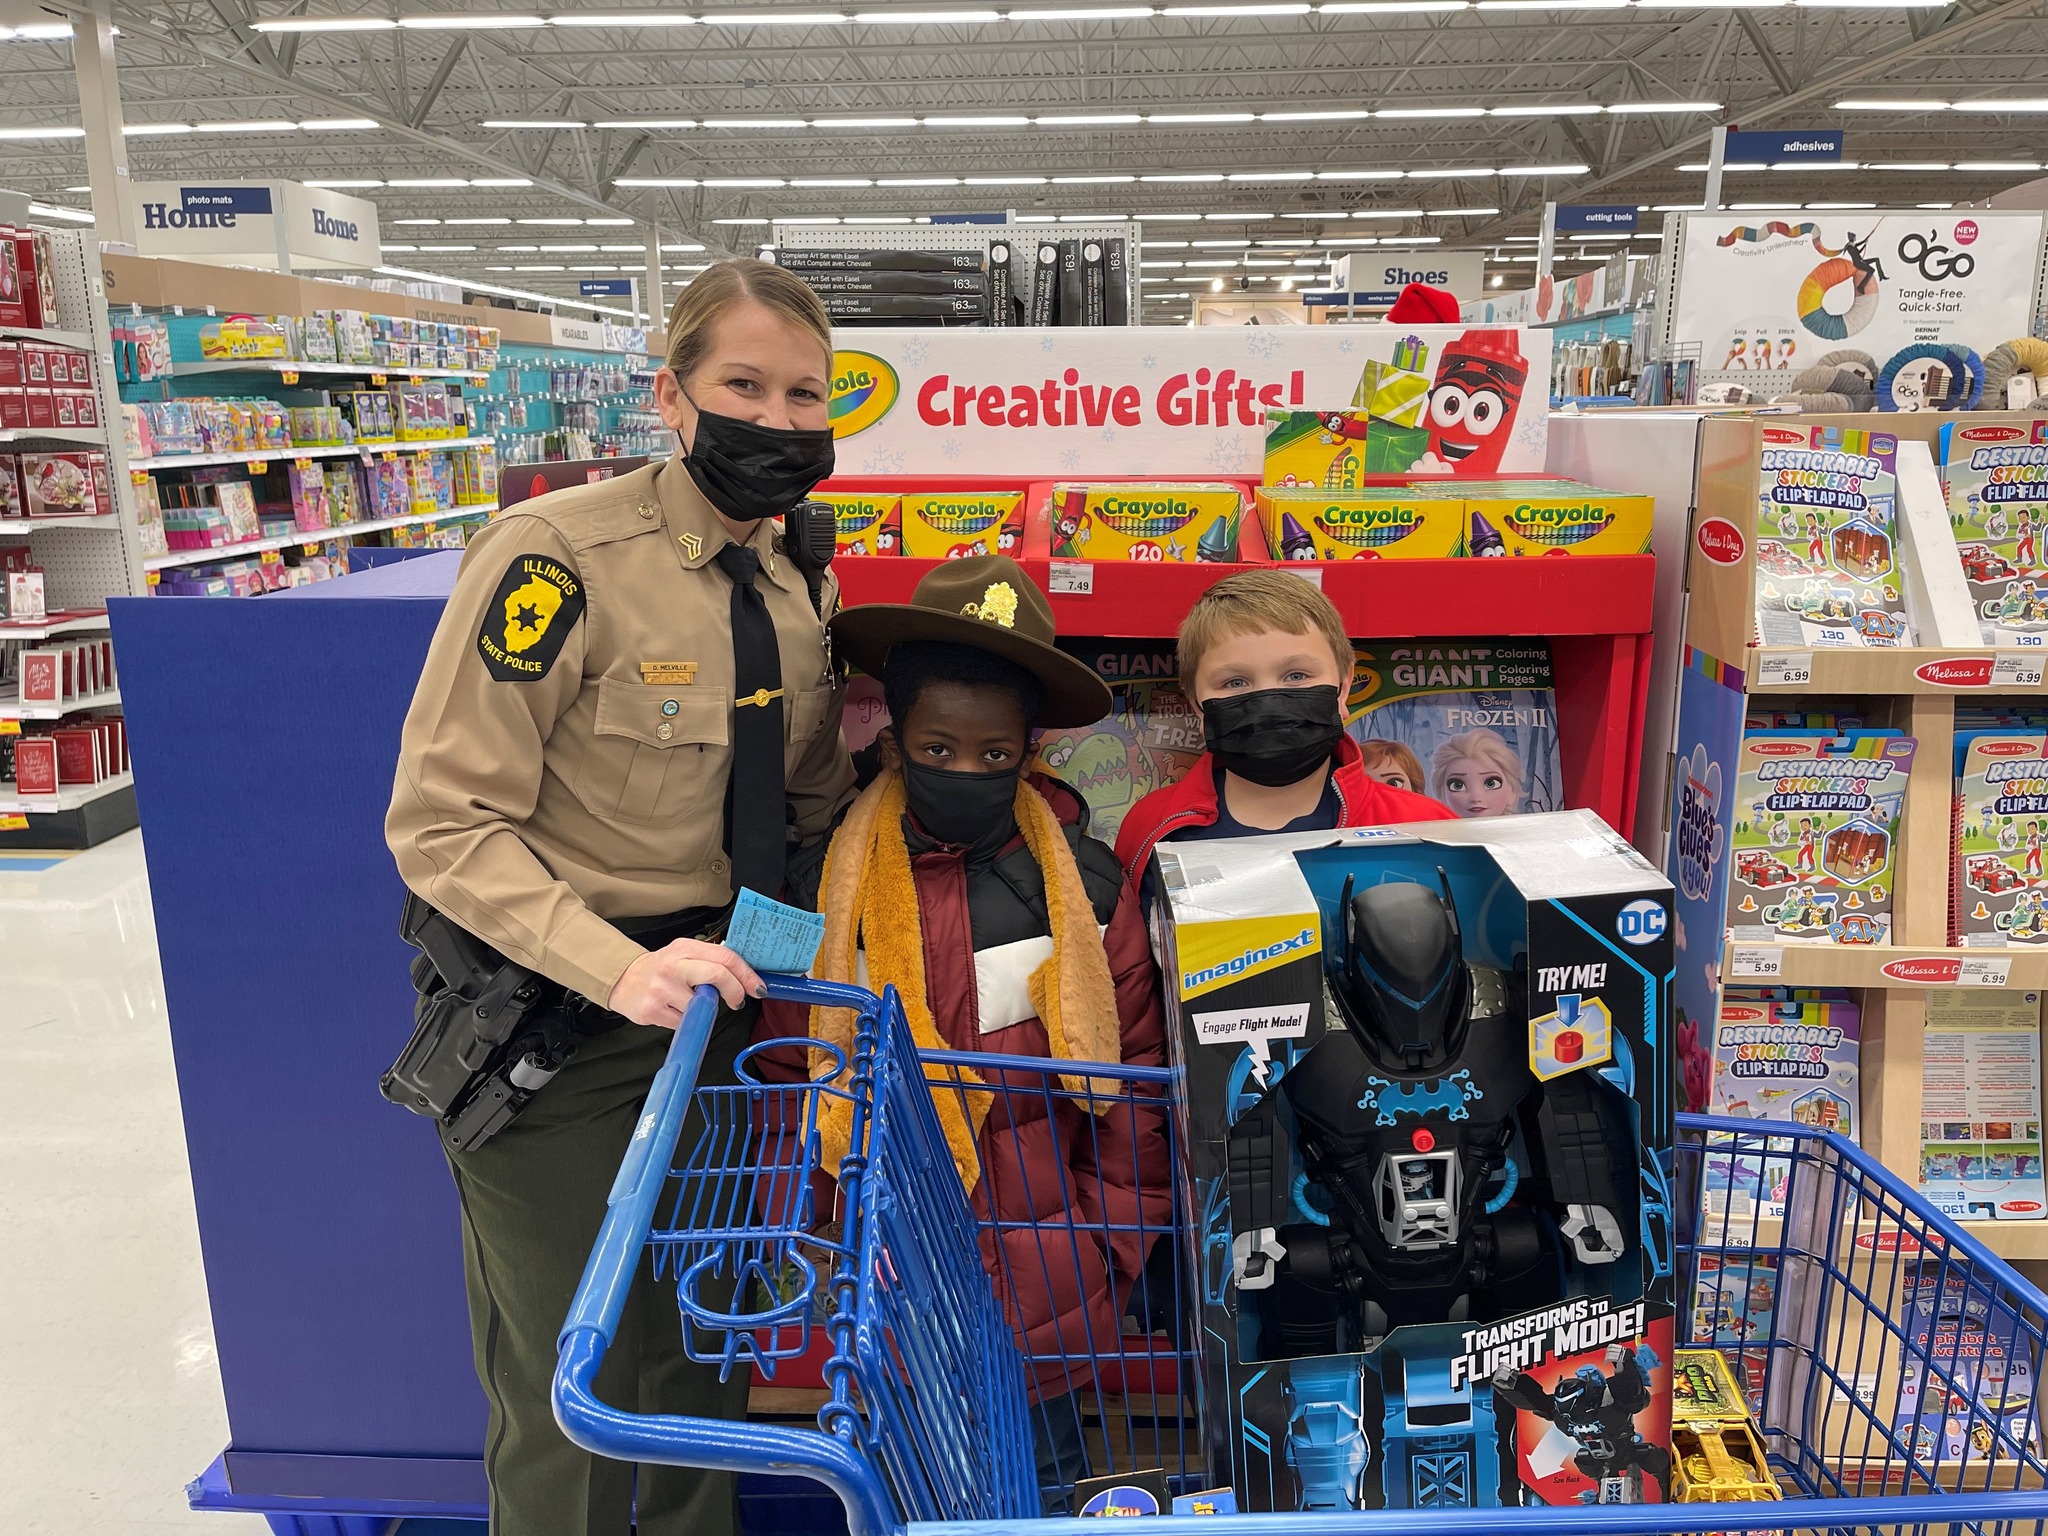 Local police departments provide Christmas gifts to local kids through the ‘Shop with a Cop’ campaign